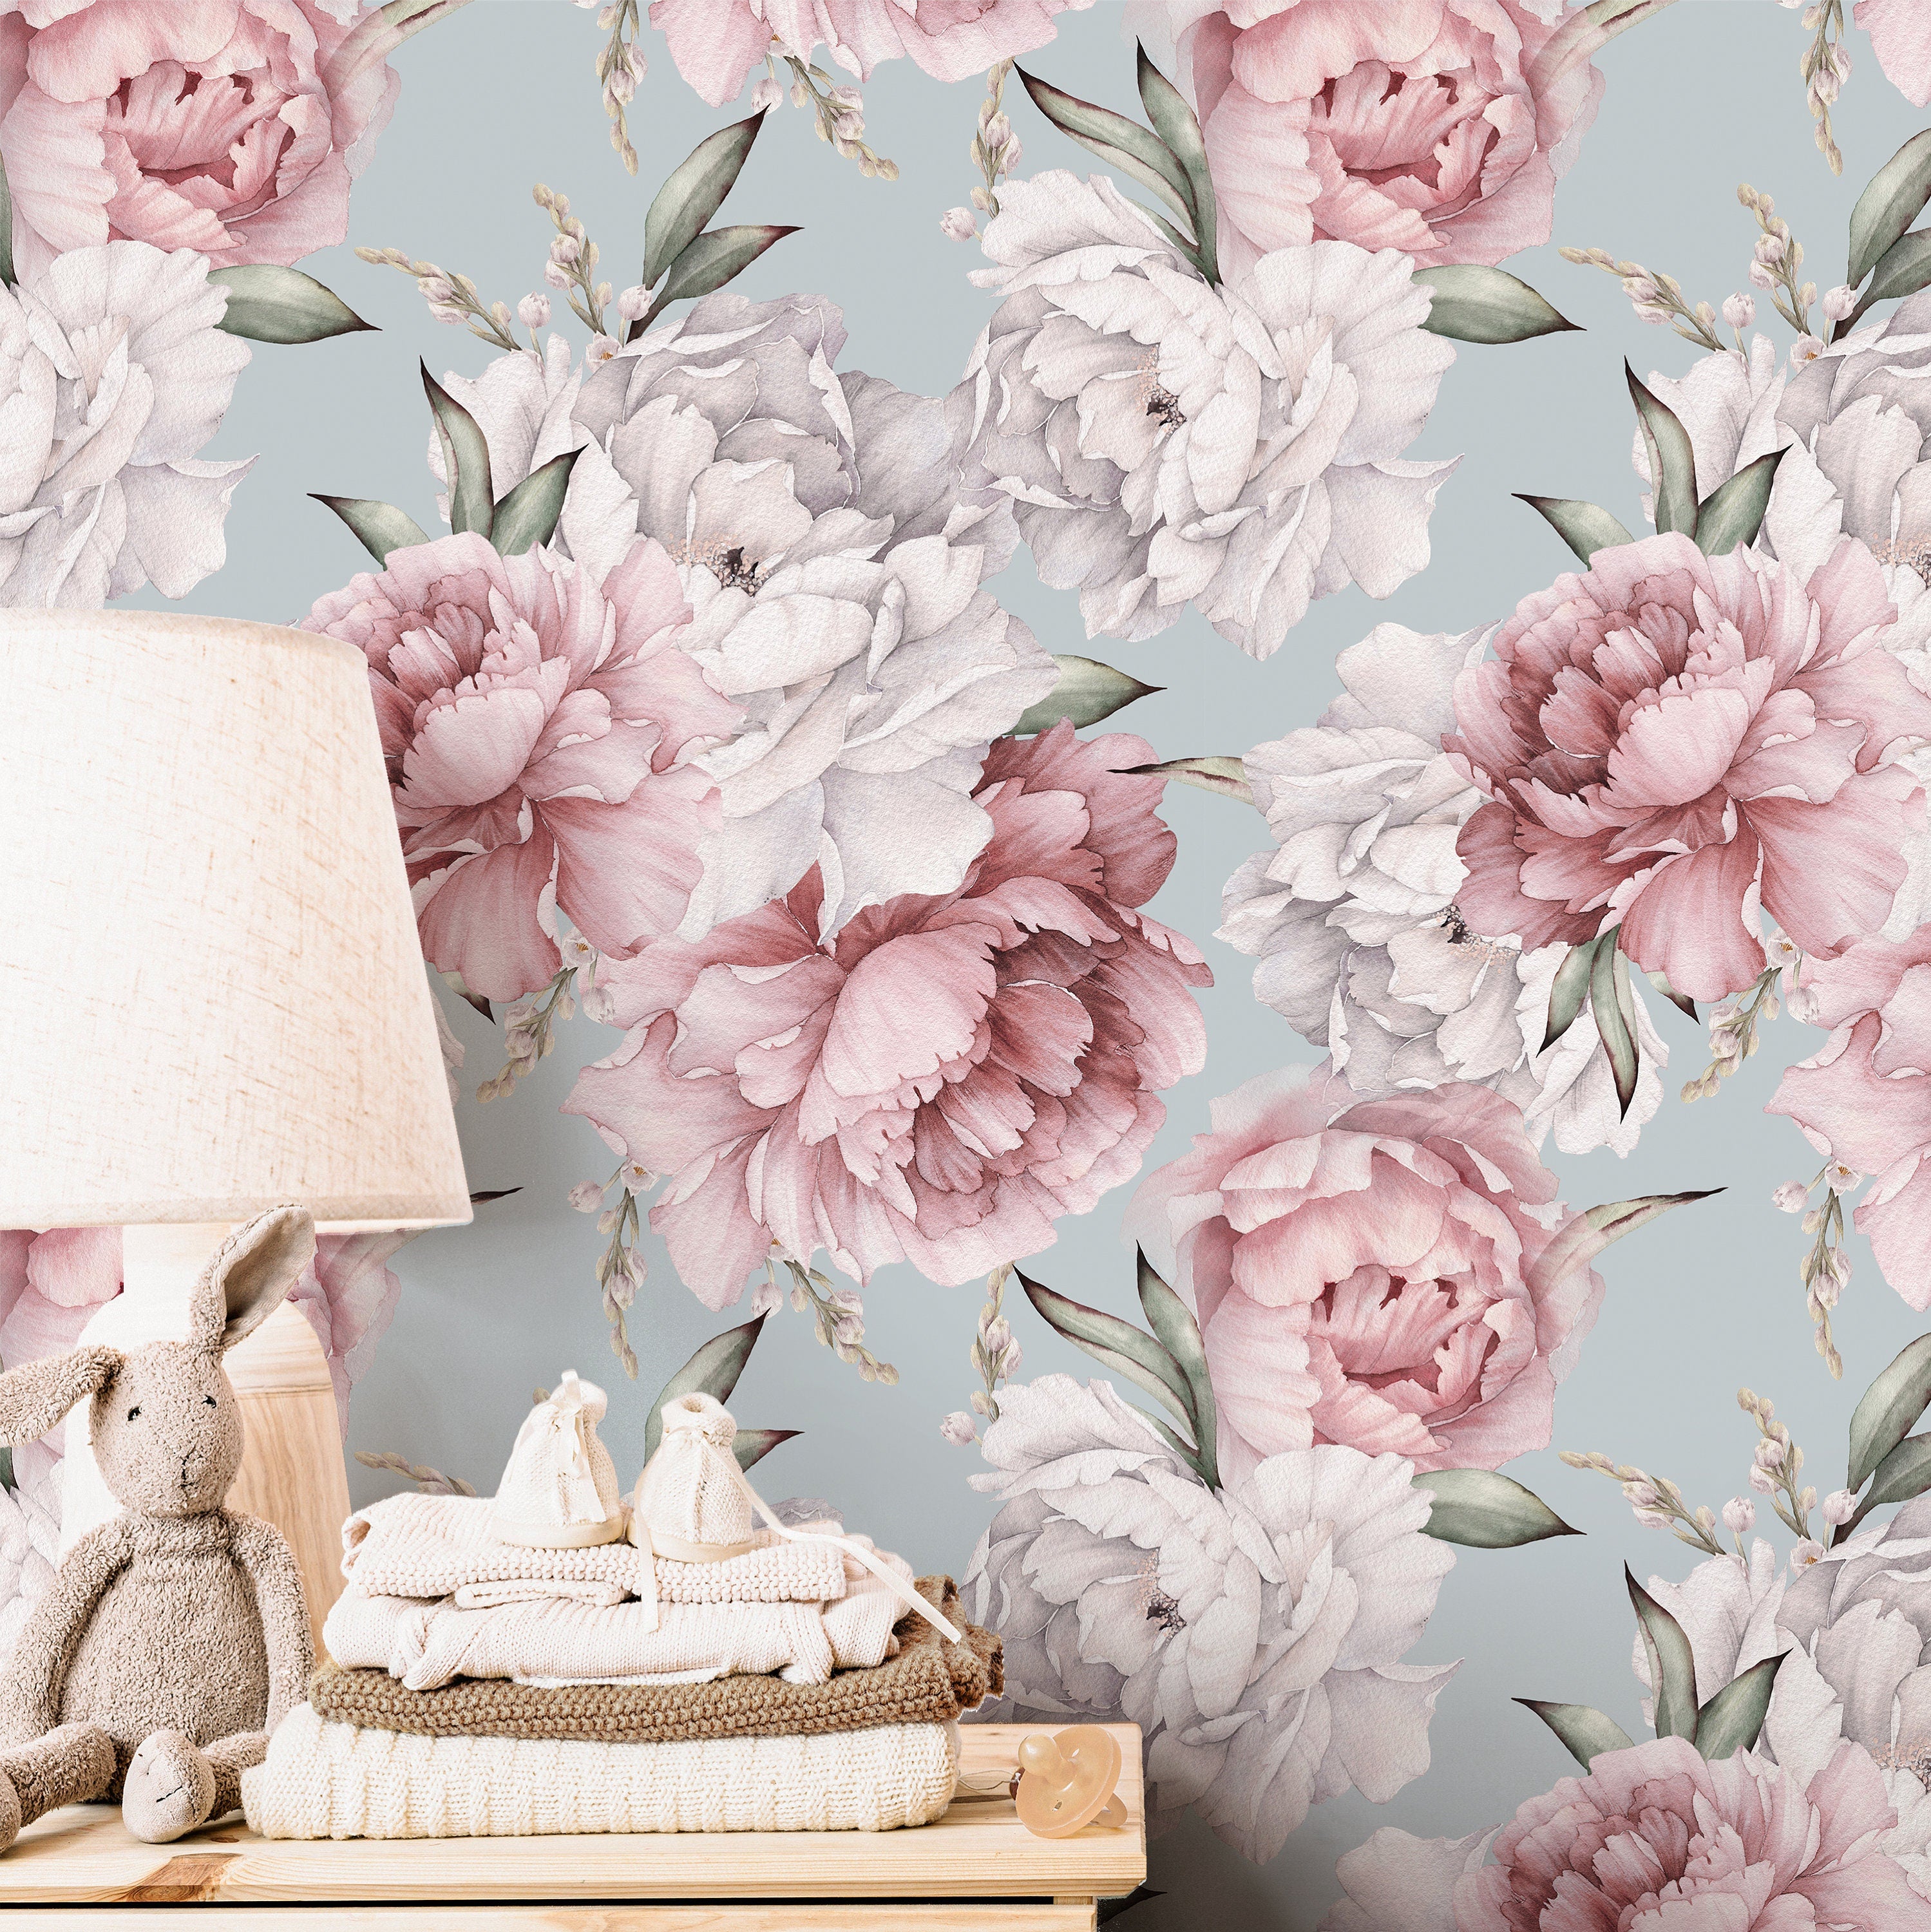 Large Floral Peony Wallpaper Peel and Stick Wallpaper Removable Wallpaper Wall Decor Home Decor Wall Art Printable Wall Art Room Decor 3713 - JamesAndColors